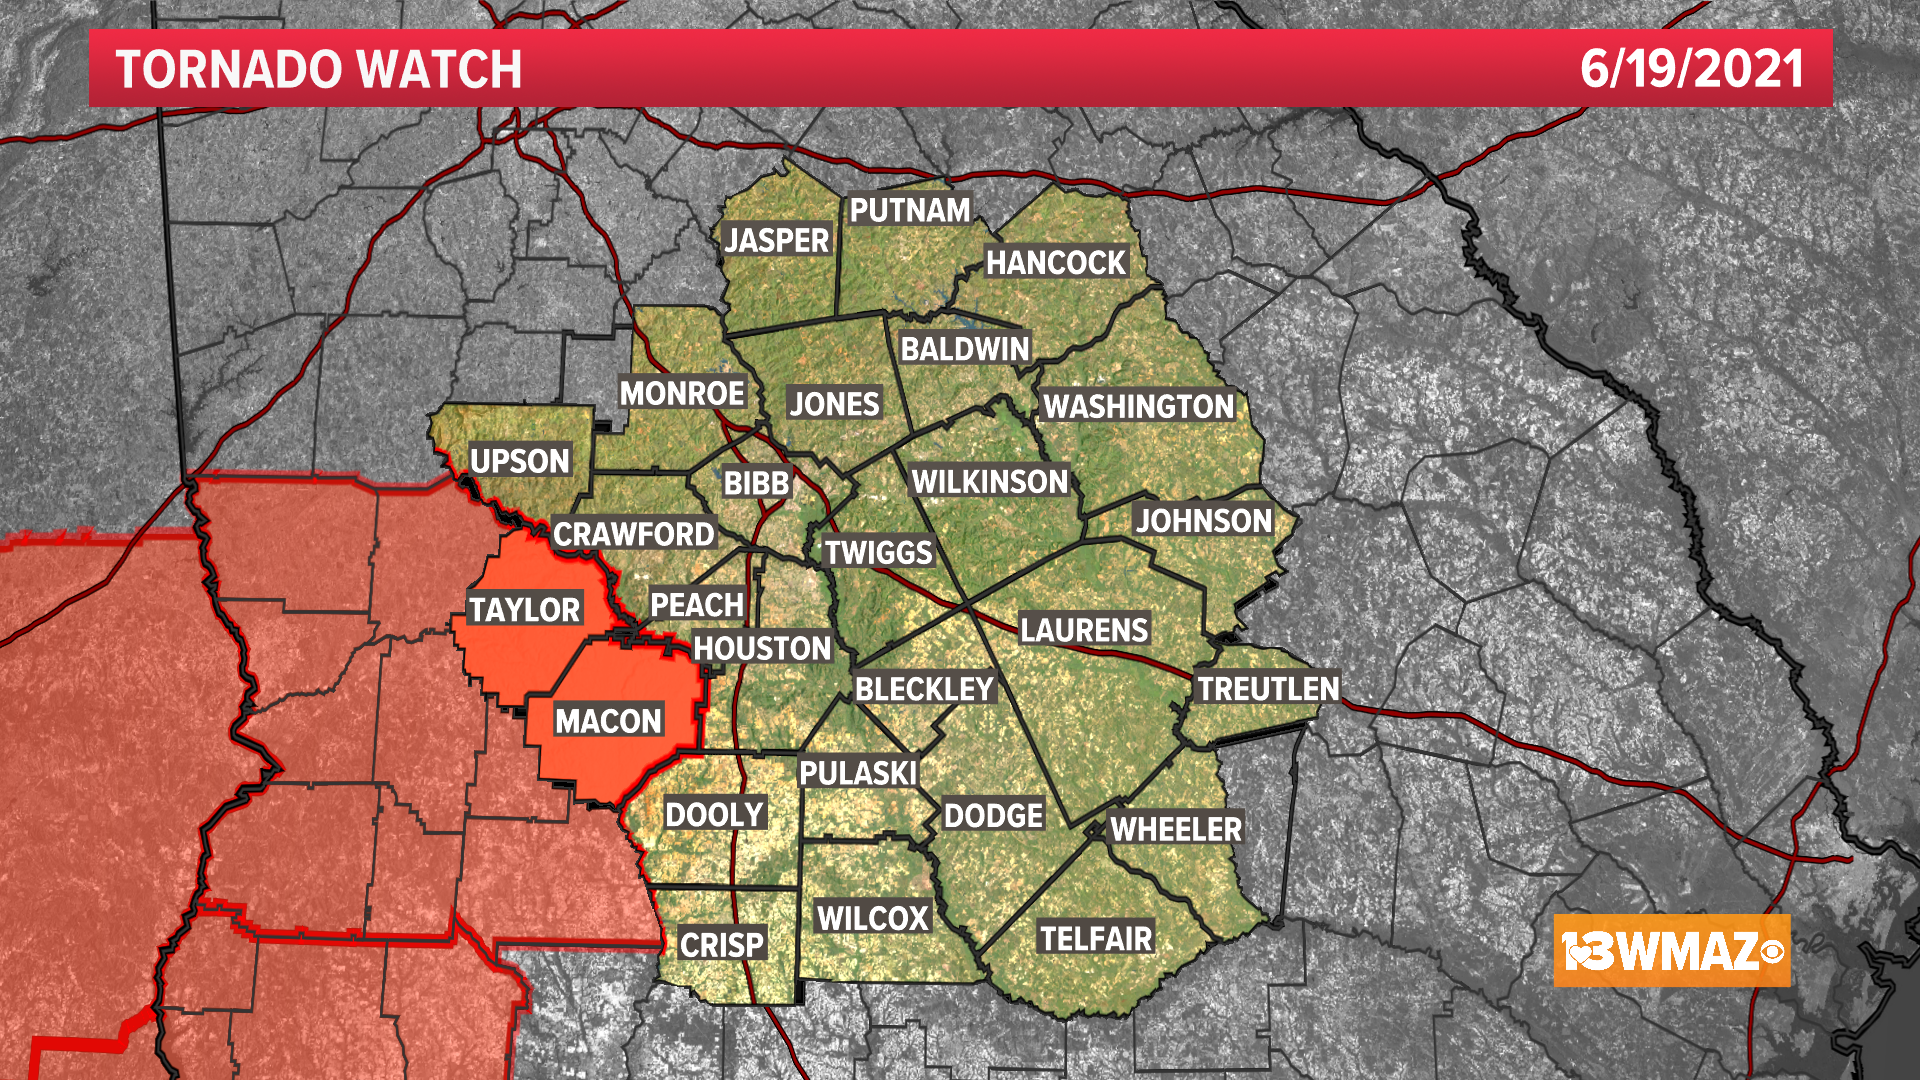 The Storm Prediction Center has issued a tornado watch for Taylor and Macon counties until 7 pm